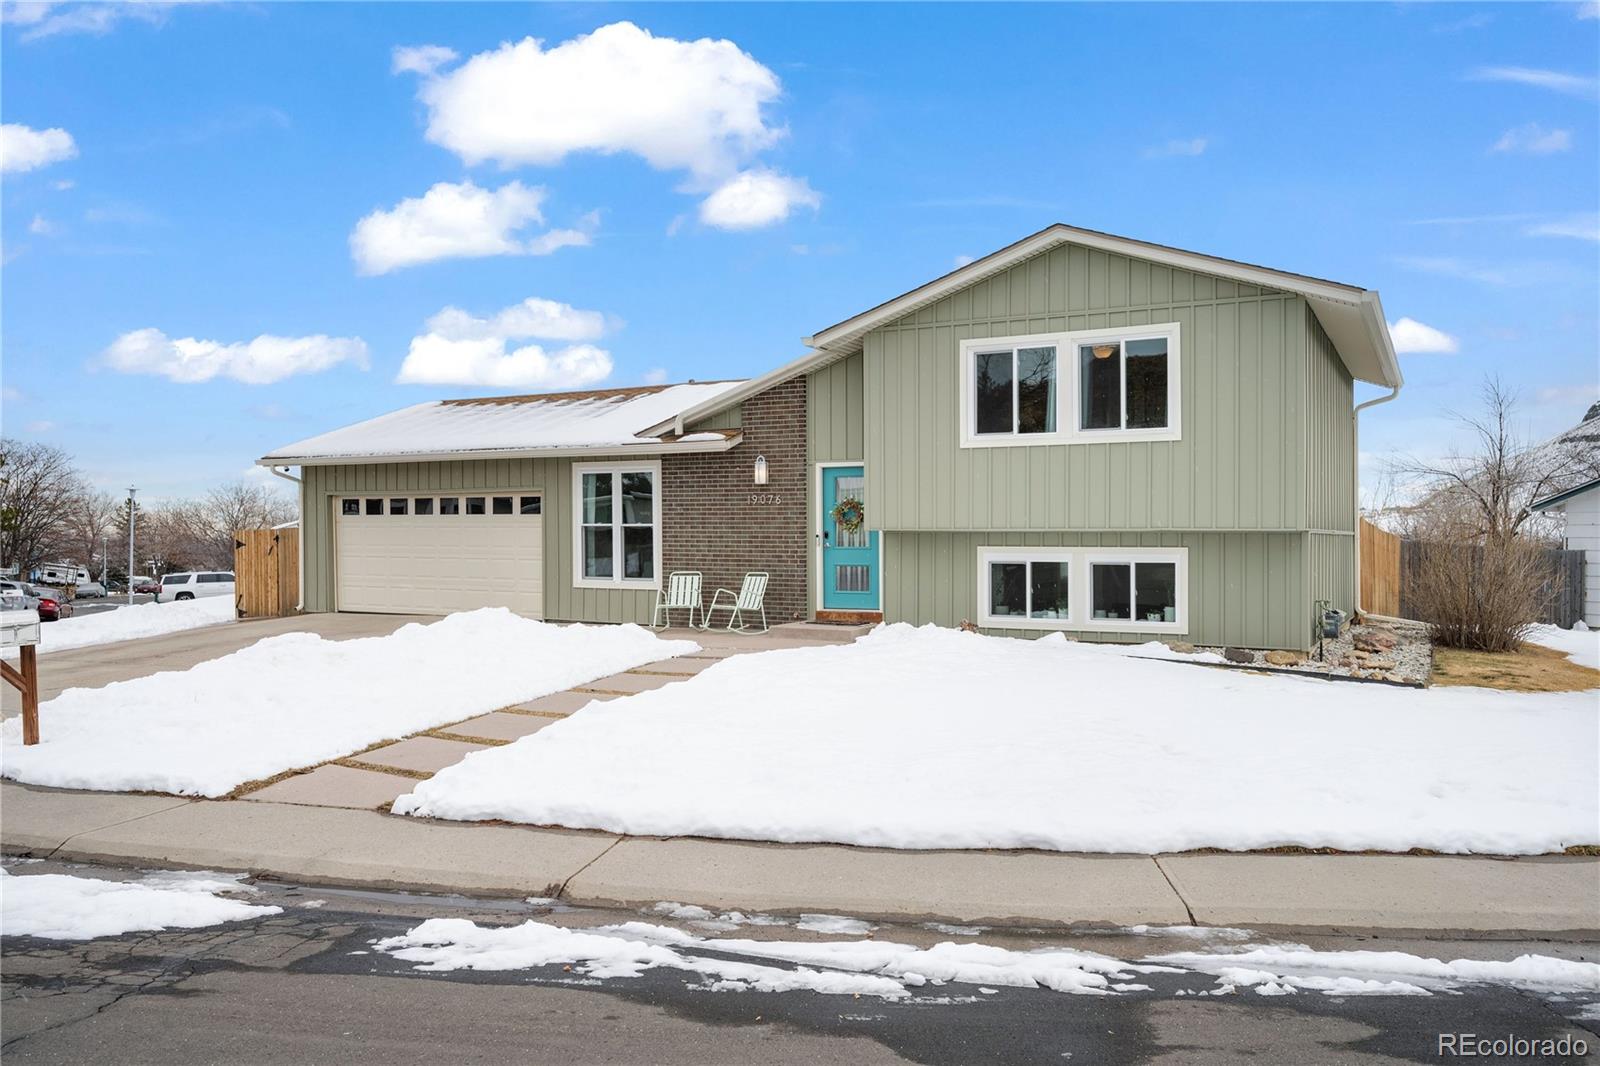 Report Image for 19076 W 62nd Avenue,Golden, Colorado